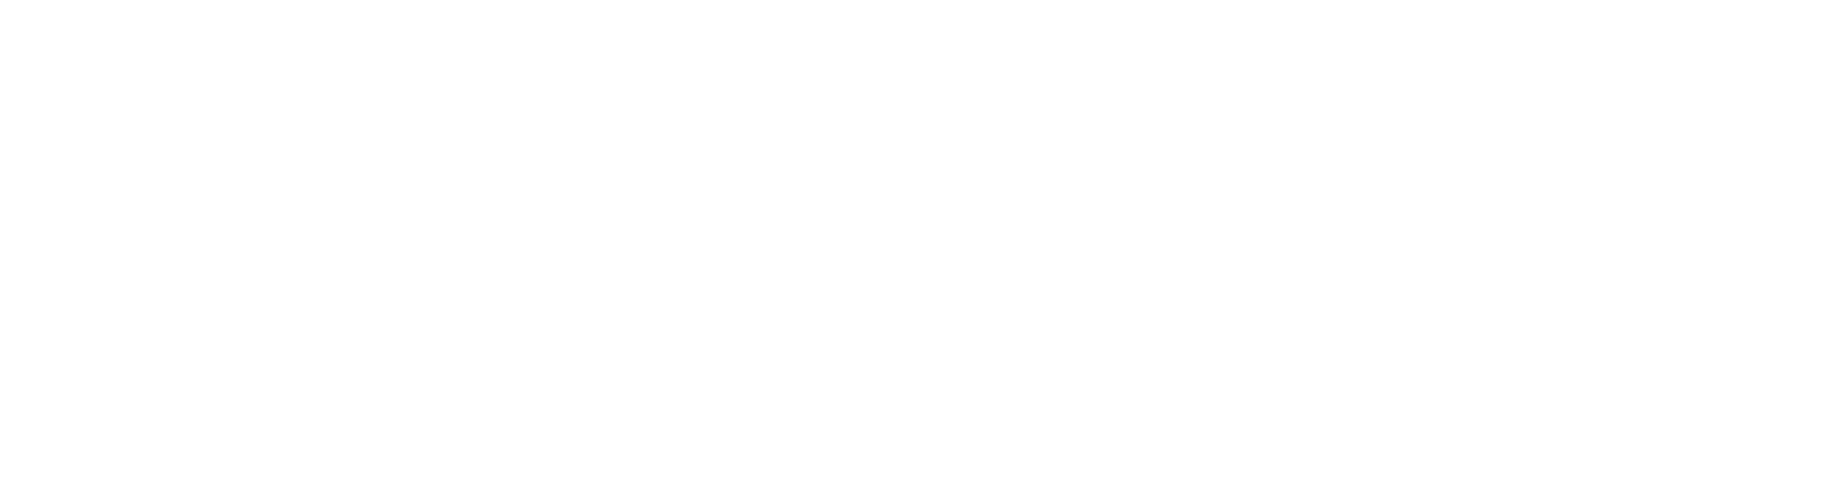 Frontline and Wagestream logos